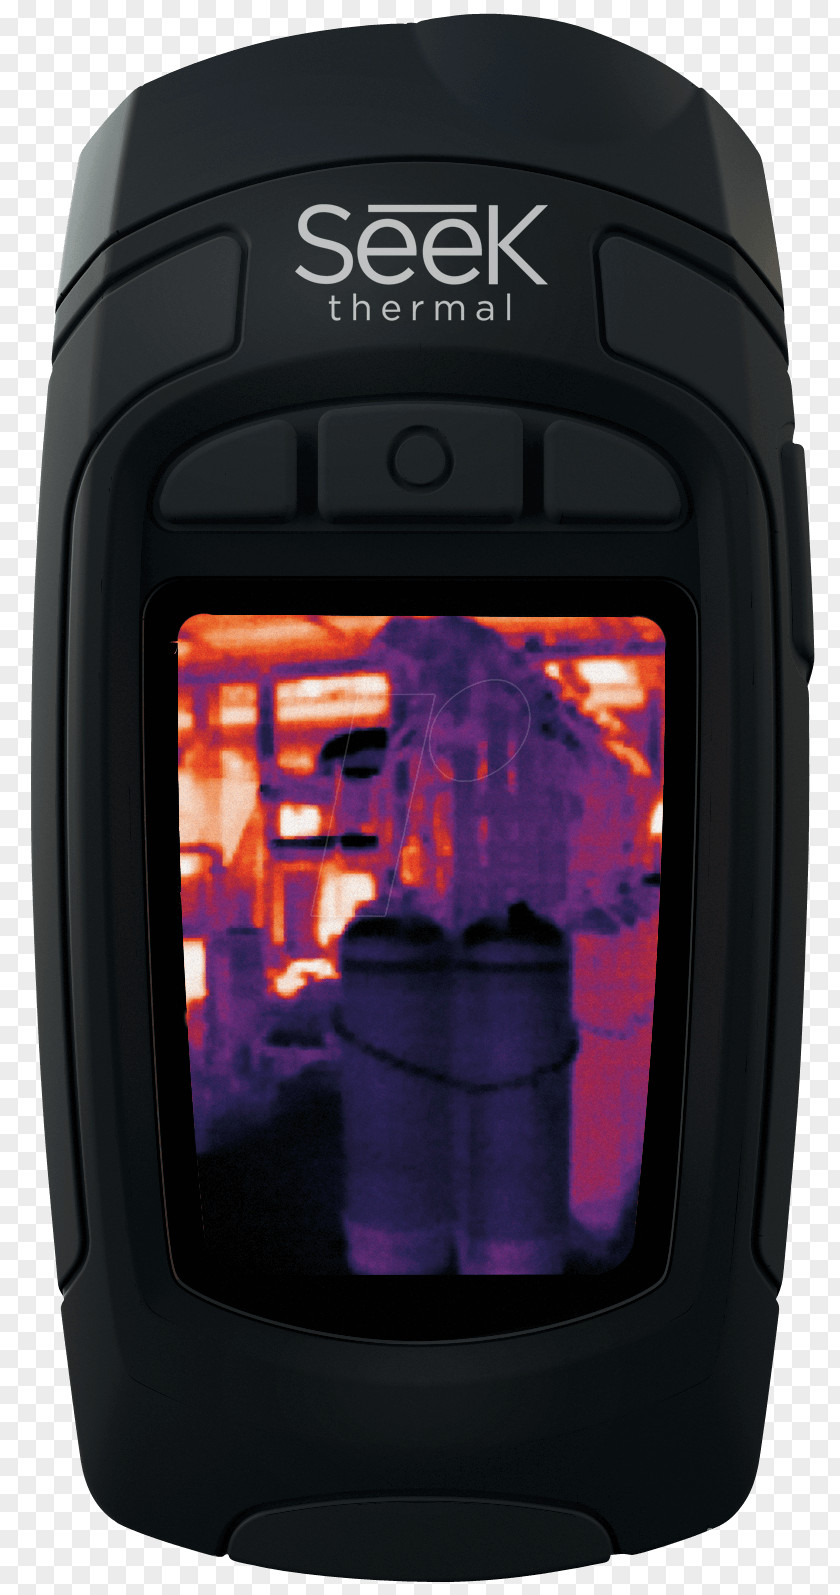 Camera Thermographic Seek Thermal Forward-looking Infrared Imaging PNG